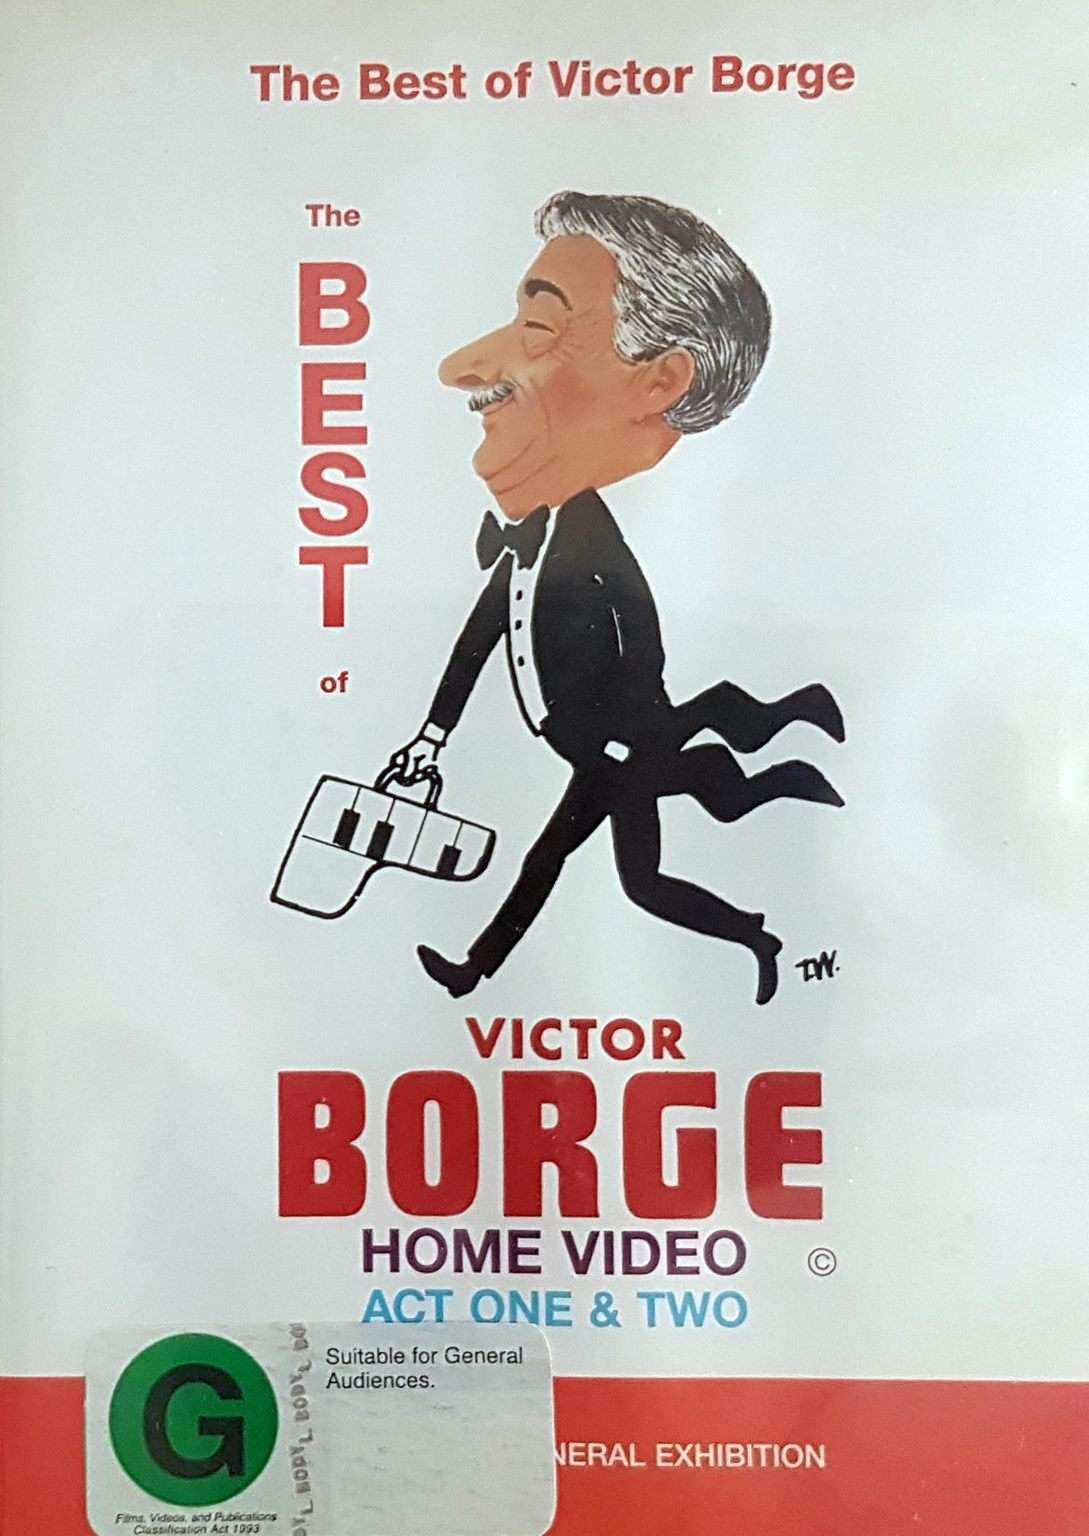 The Best of Victor Borge